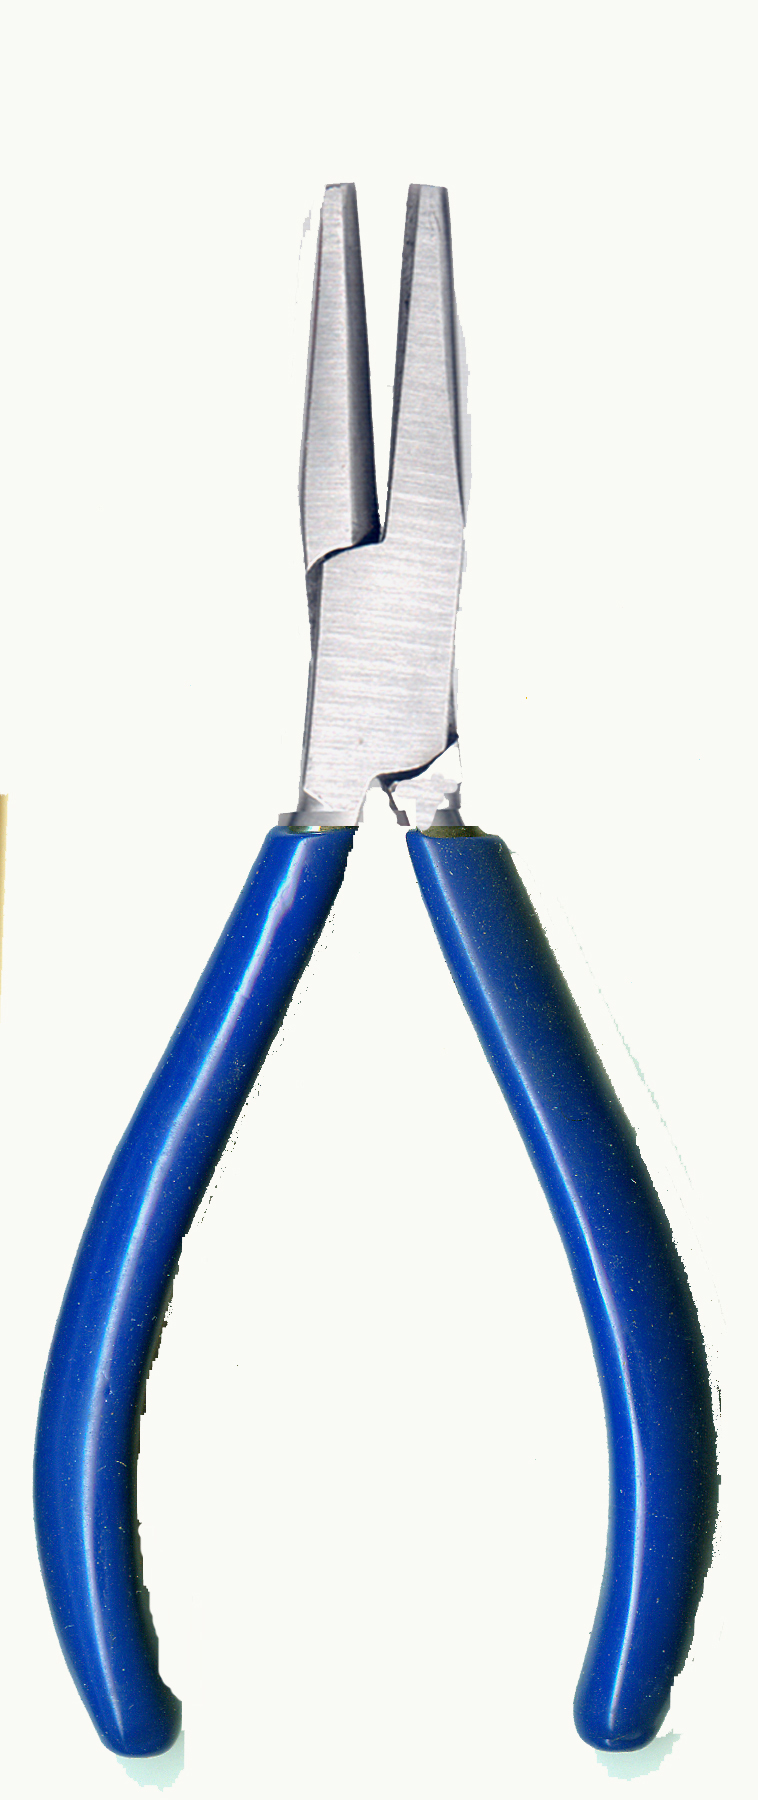 ECONOLINE LAP JOINT PLIER. RING BENDING - Click Image to Close